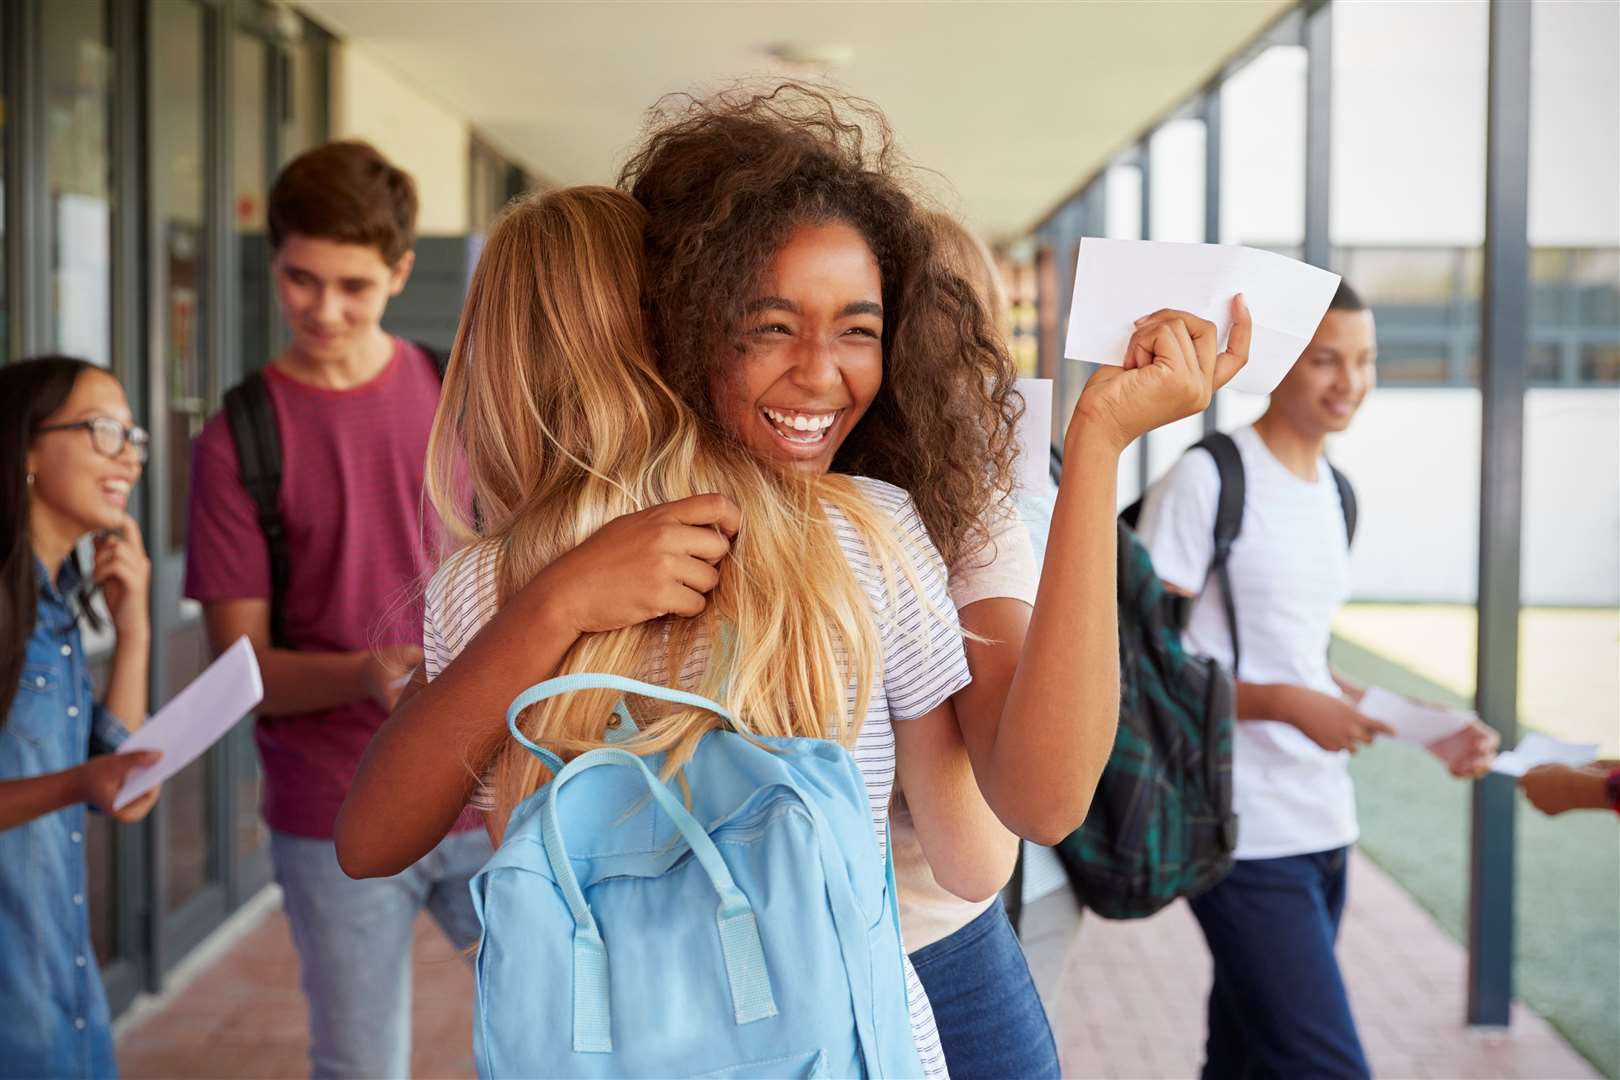 Students collected their results this week. Image: iStock.